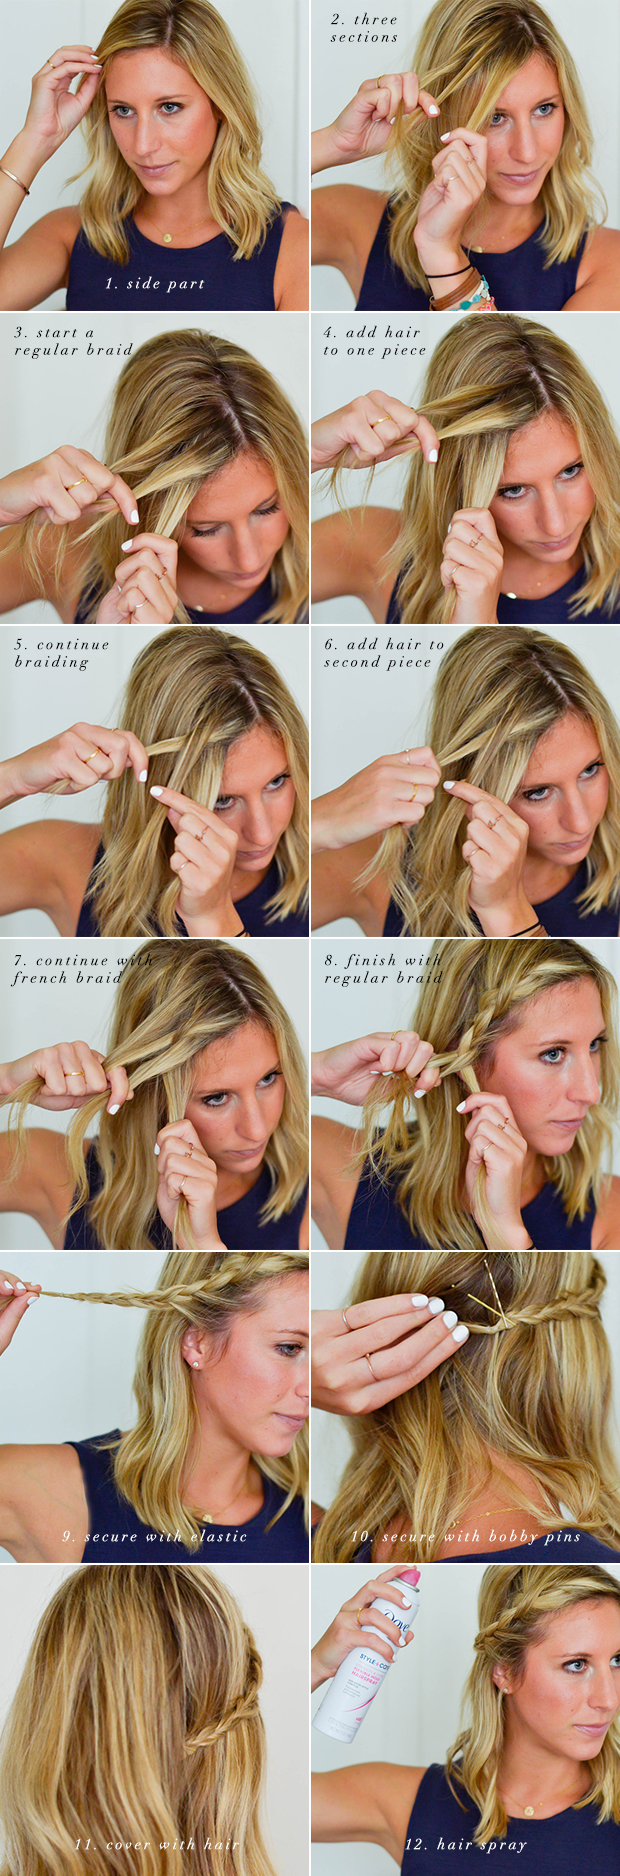 french_braid_hairstyle_tutorial